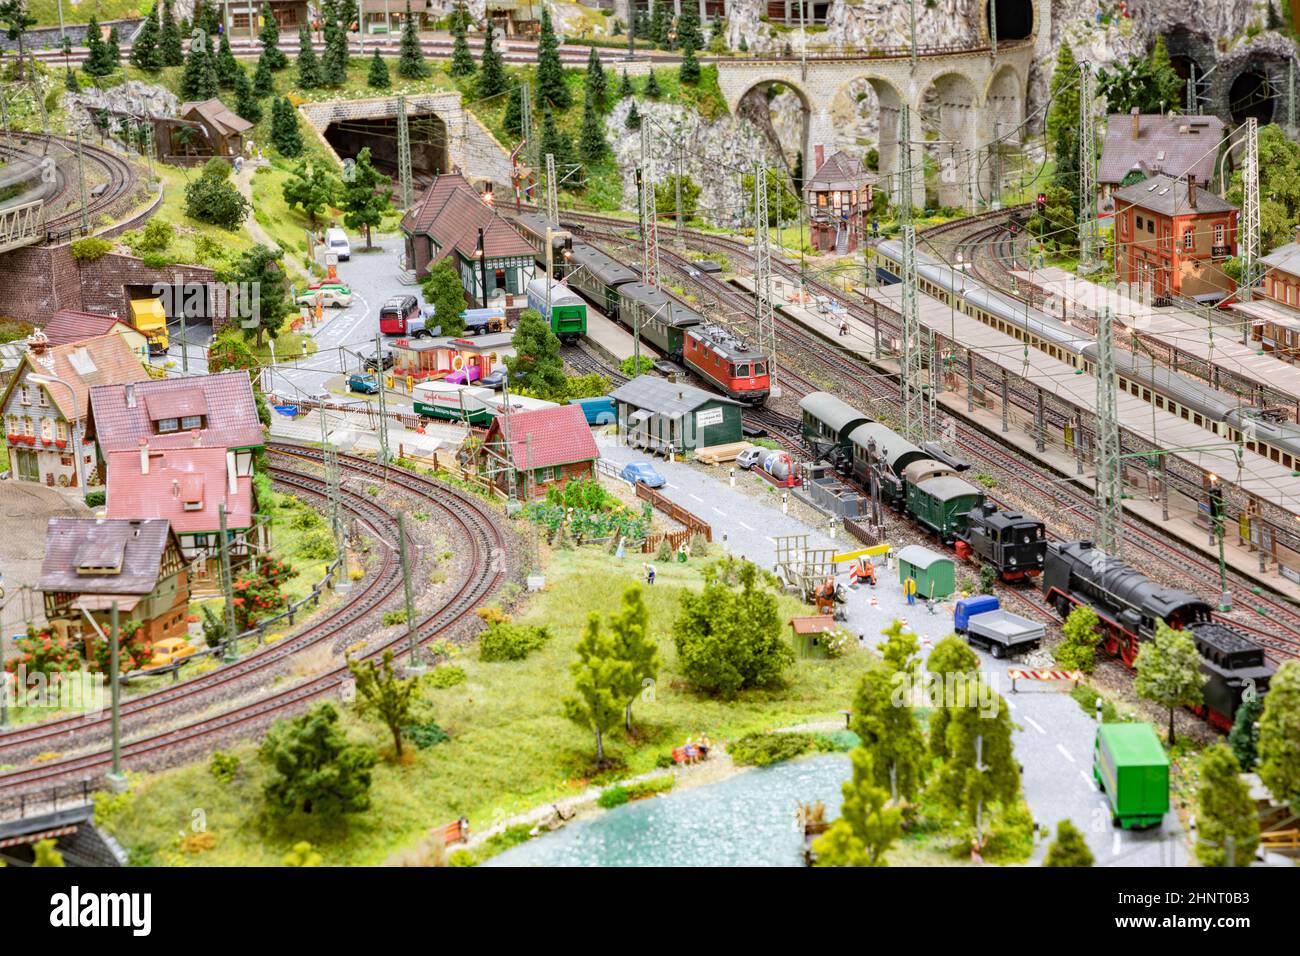 detail of model railway with landscape, villages and operating train Stock Photo